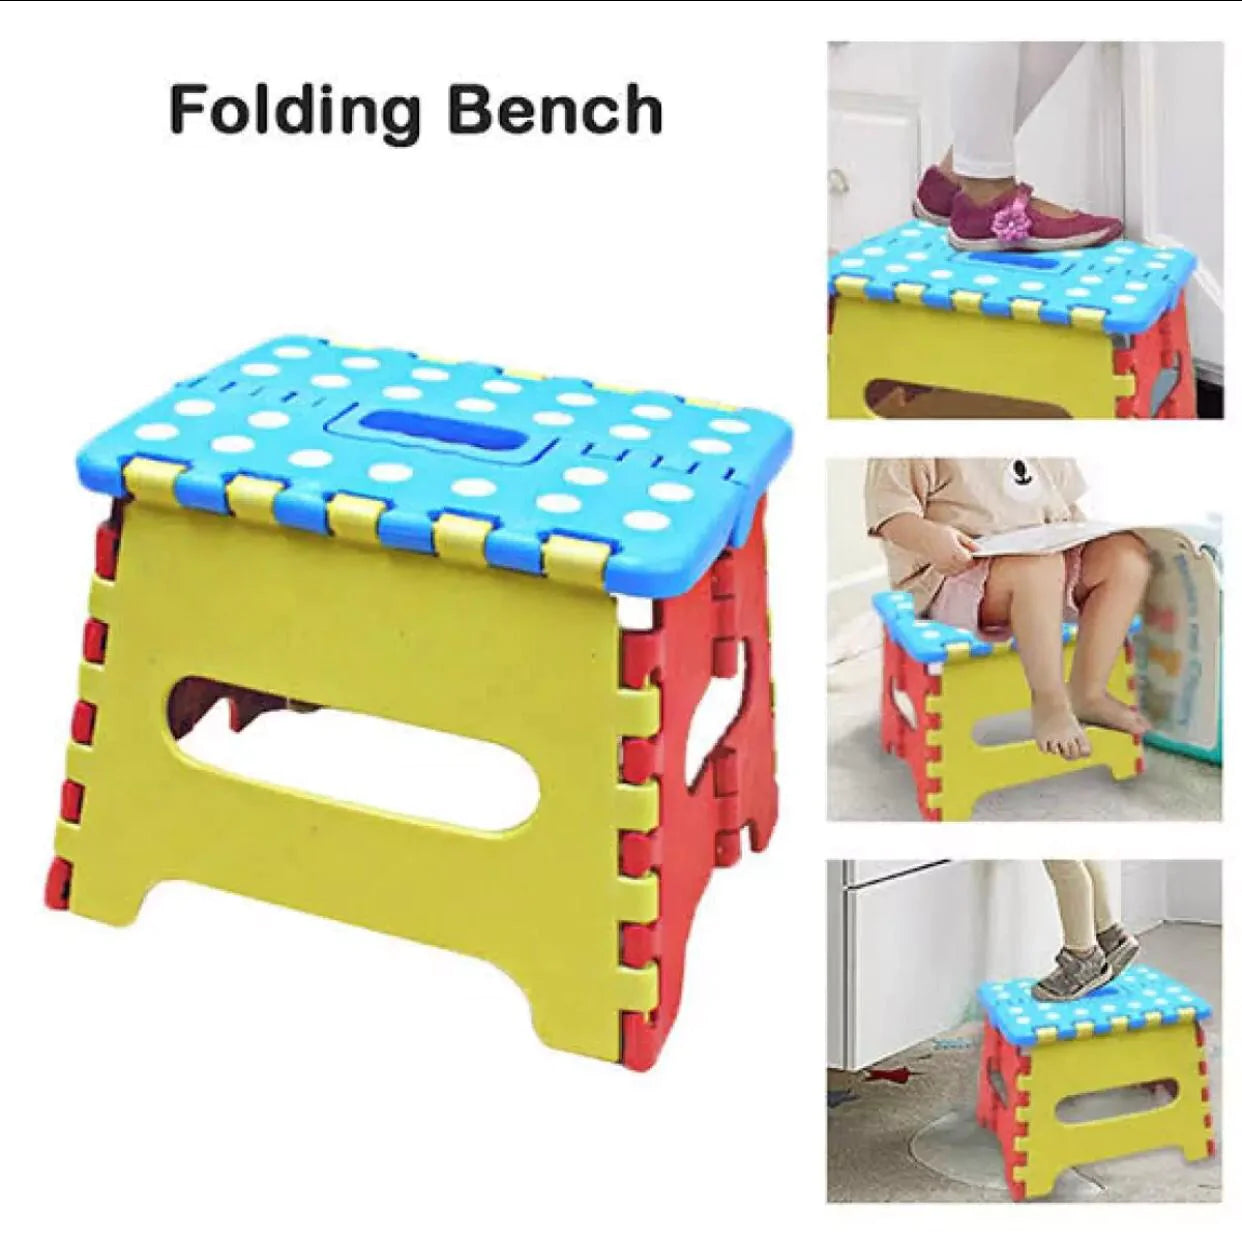 Multi Purpose Portable Folding Stool For Kids Or Adults Lightweight Step Stool Holding stool For camping